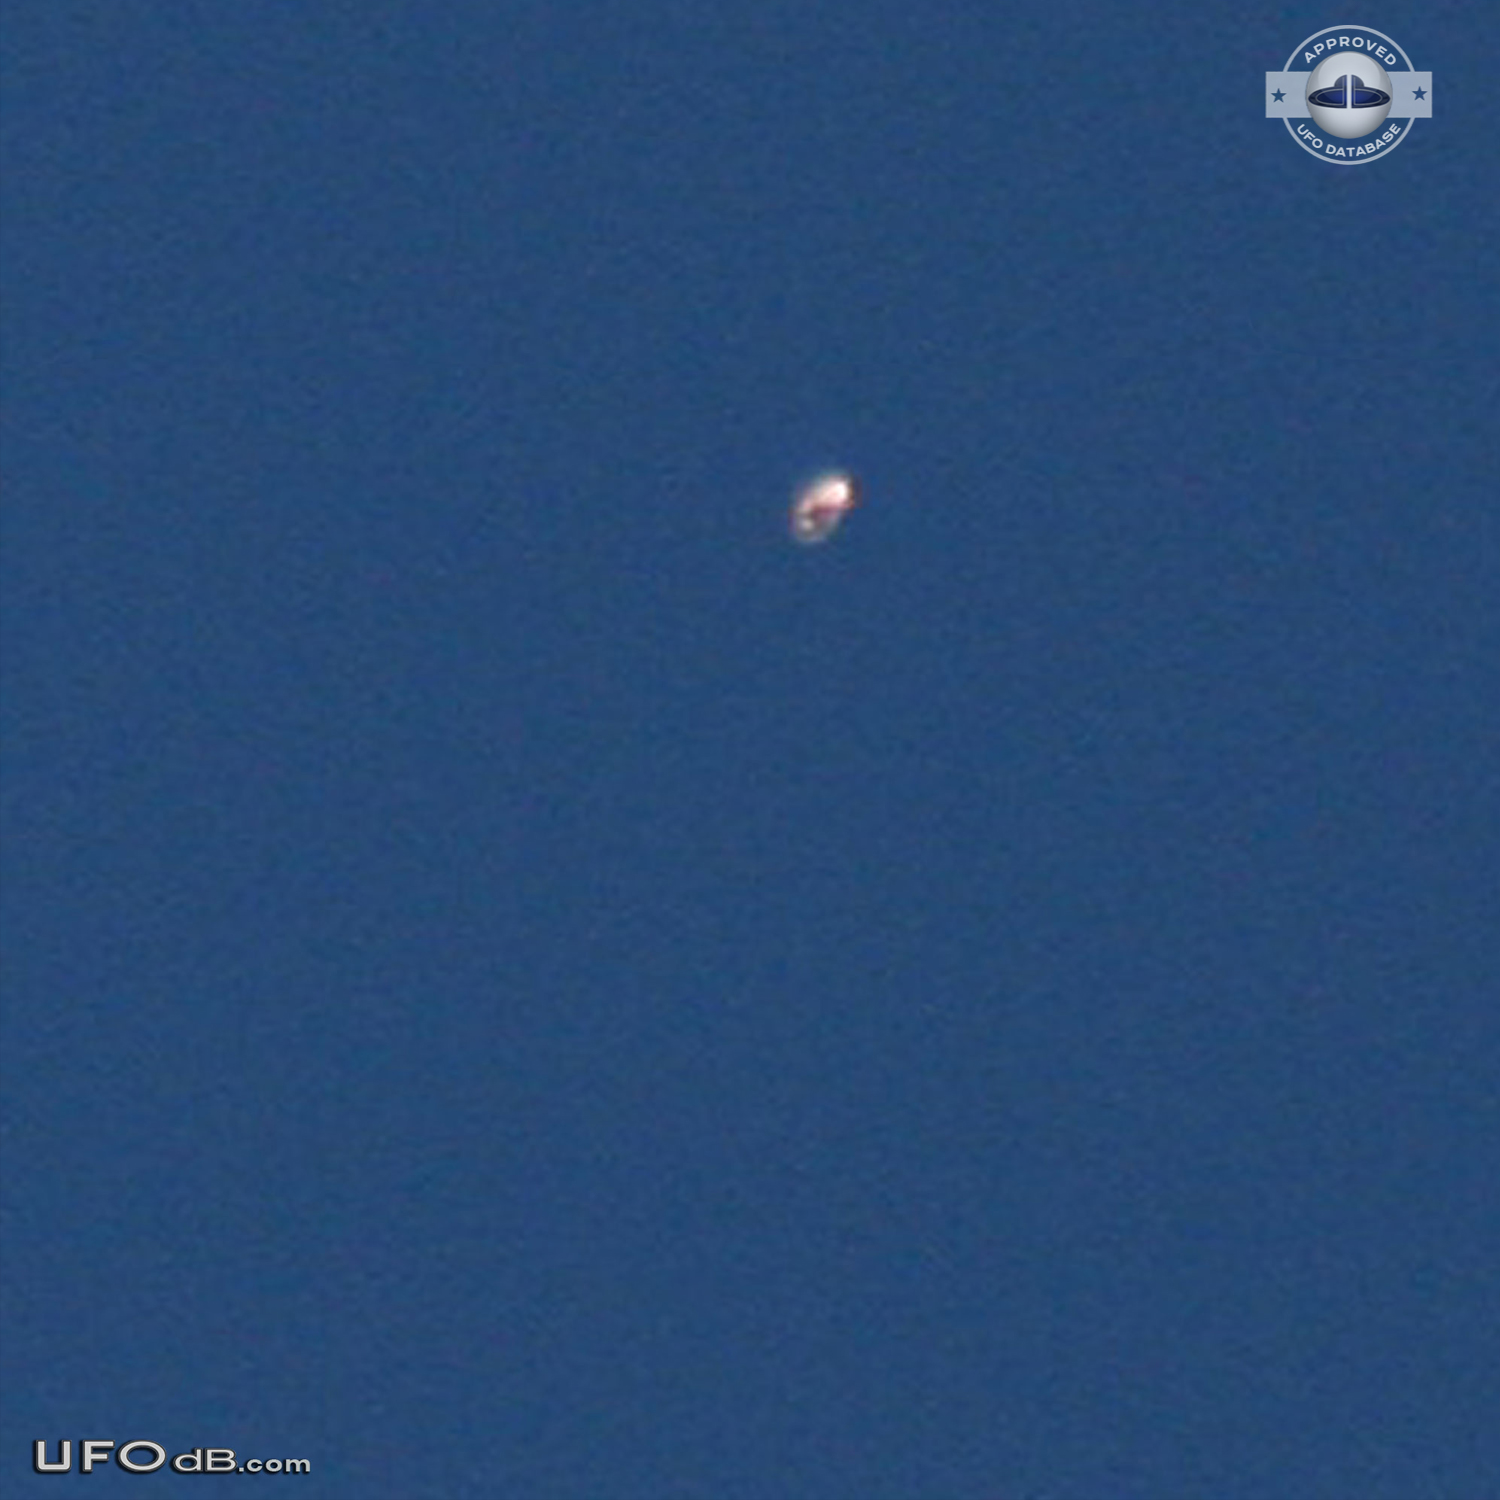 Very bright reflective UFO - Thousands Oaks California - pictures 2012 UFO Picture #516-3